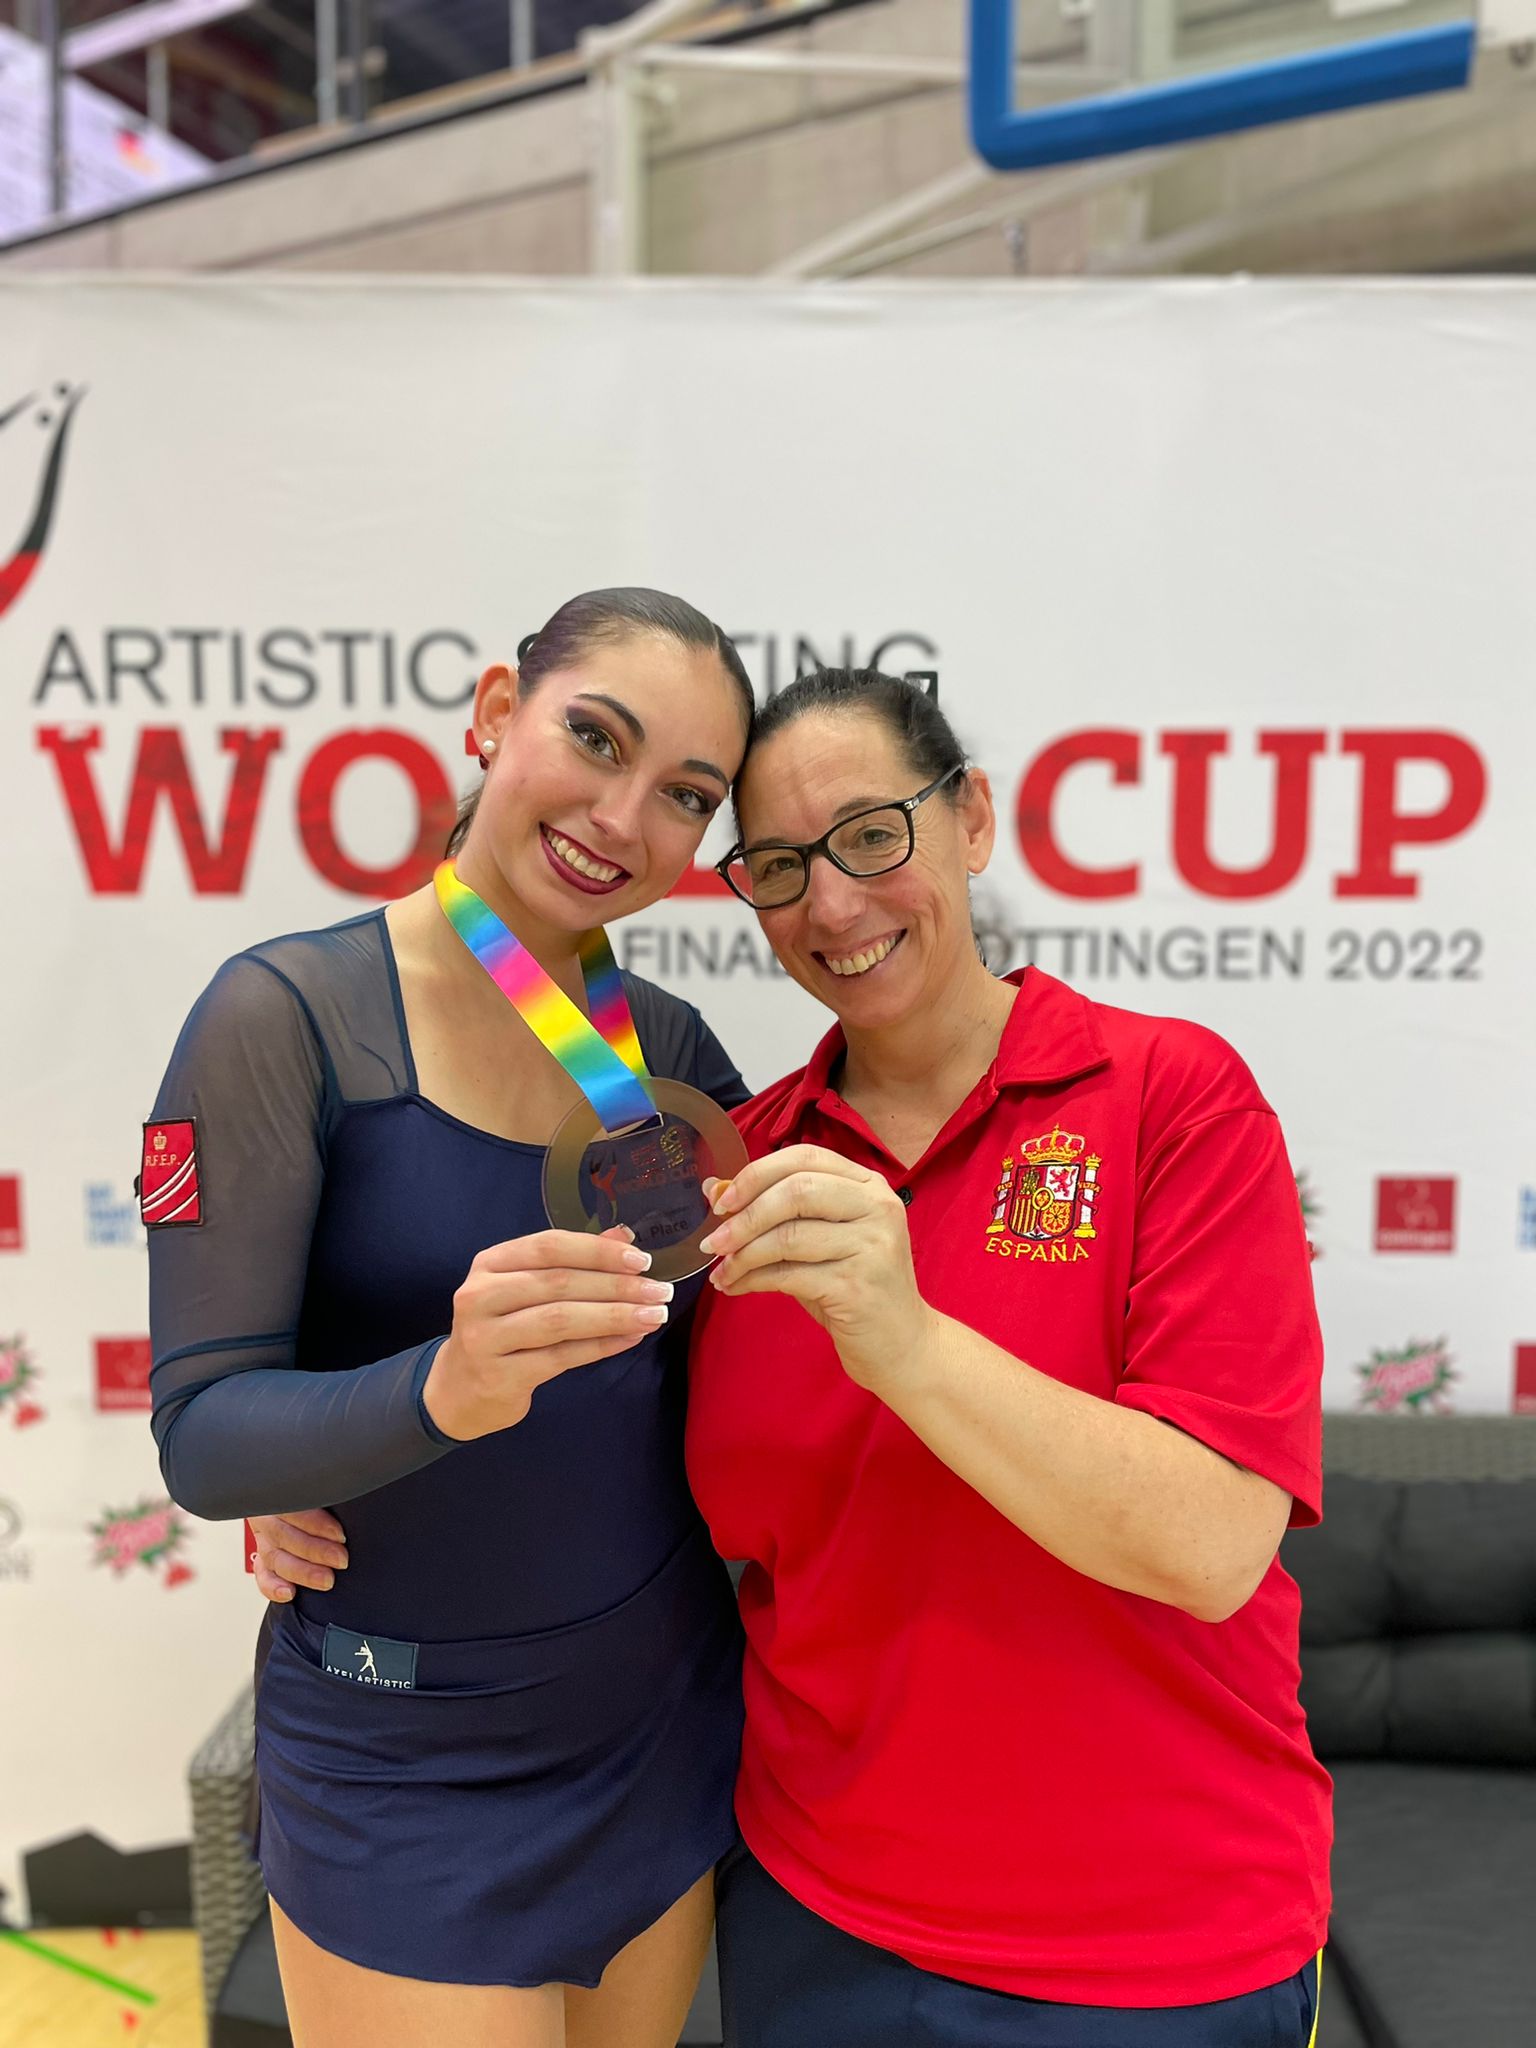 Baldizzone crowned Artistic Skating World Cup champion again